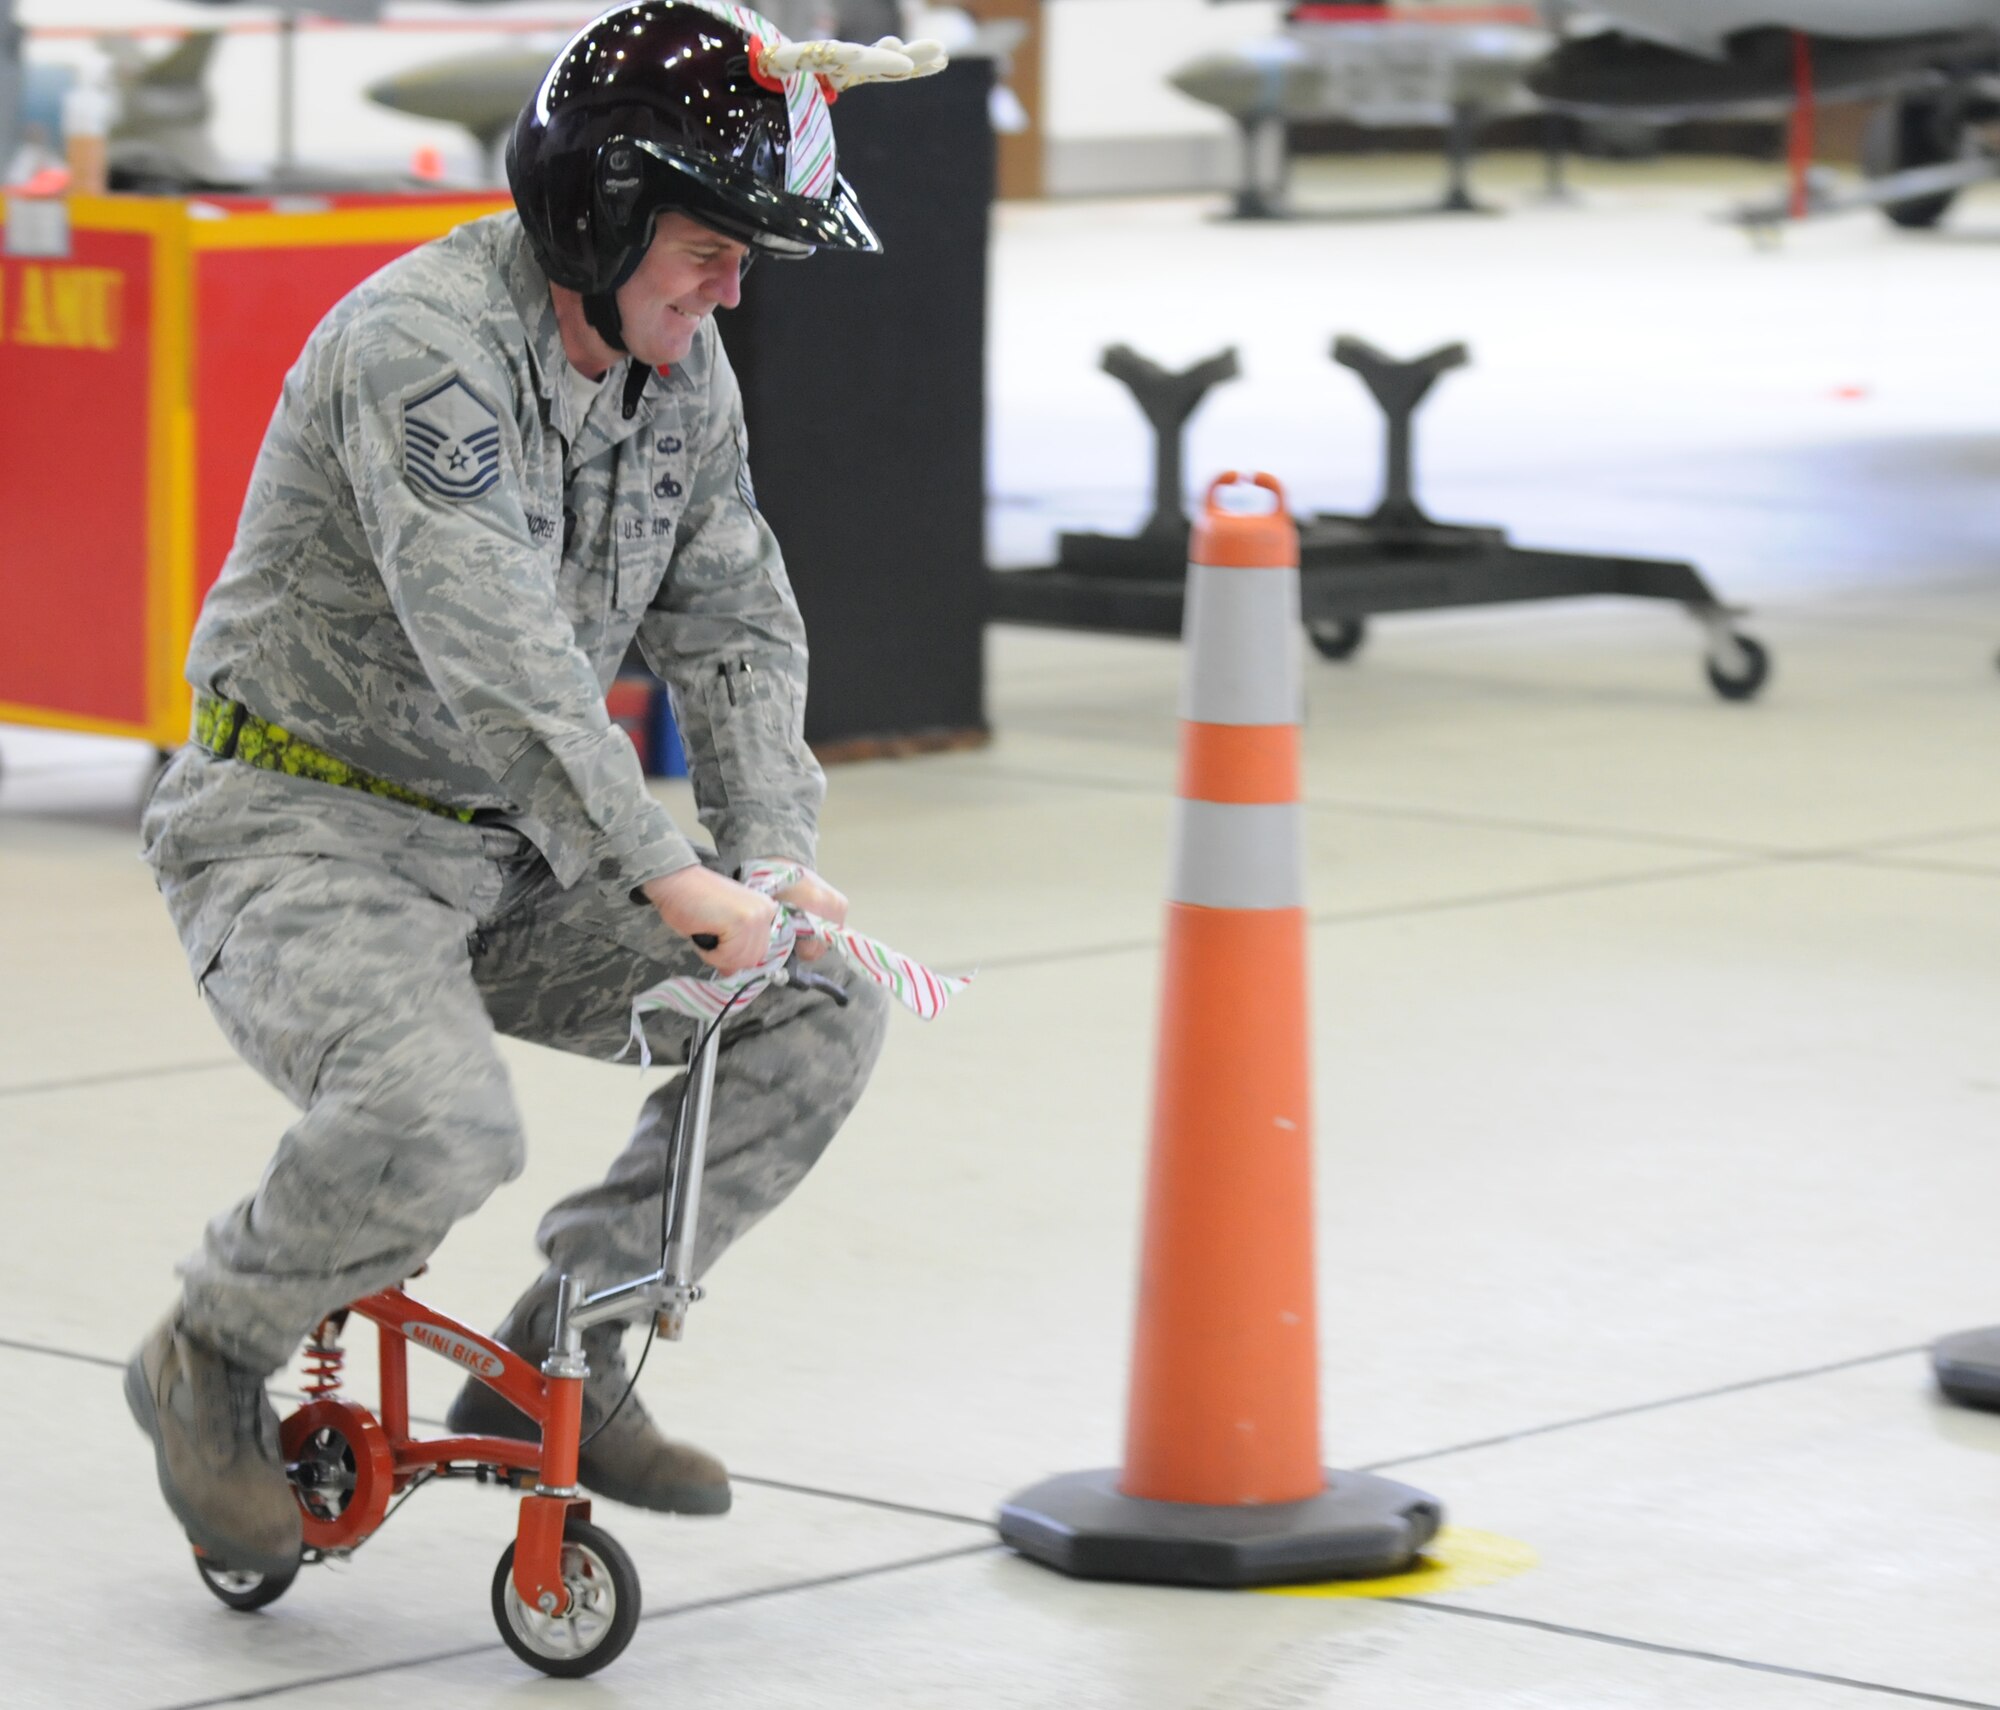 SPANGDAHLEM AIR BASE, Germany – Master Sgt. Chambliss McKendree, 52nd Aircraft Maintenance Squadron weapons flight chief, navigates a course of road cones on a small bicycle during an intermission between the Load Crew of the Year and Jammer Driver of the Year competitions. Sergeant McKendree competed against fellow Weapons Flight Chiefs to see who could navigate the course in the fastest time. The winners of the Load Crew of the Year, and the Jammer Driver of the Year, will be announced during the Annual Awards Ceremony. (U.S. Air Force photo/Airman 1st Class Matthew B. Fredericks)